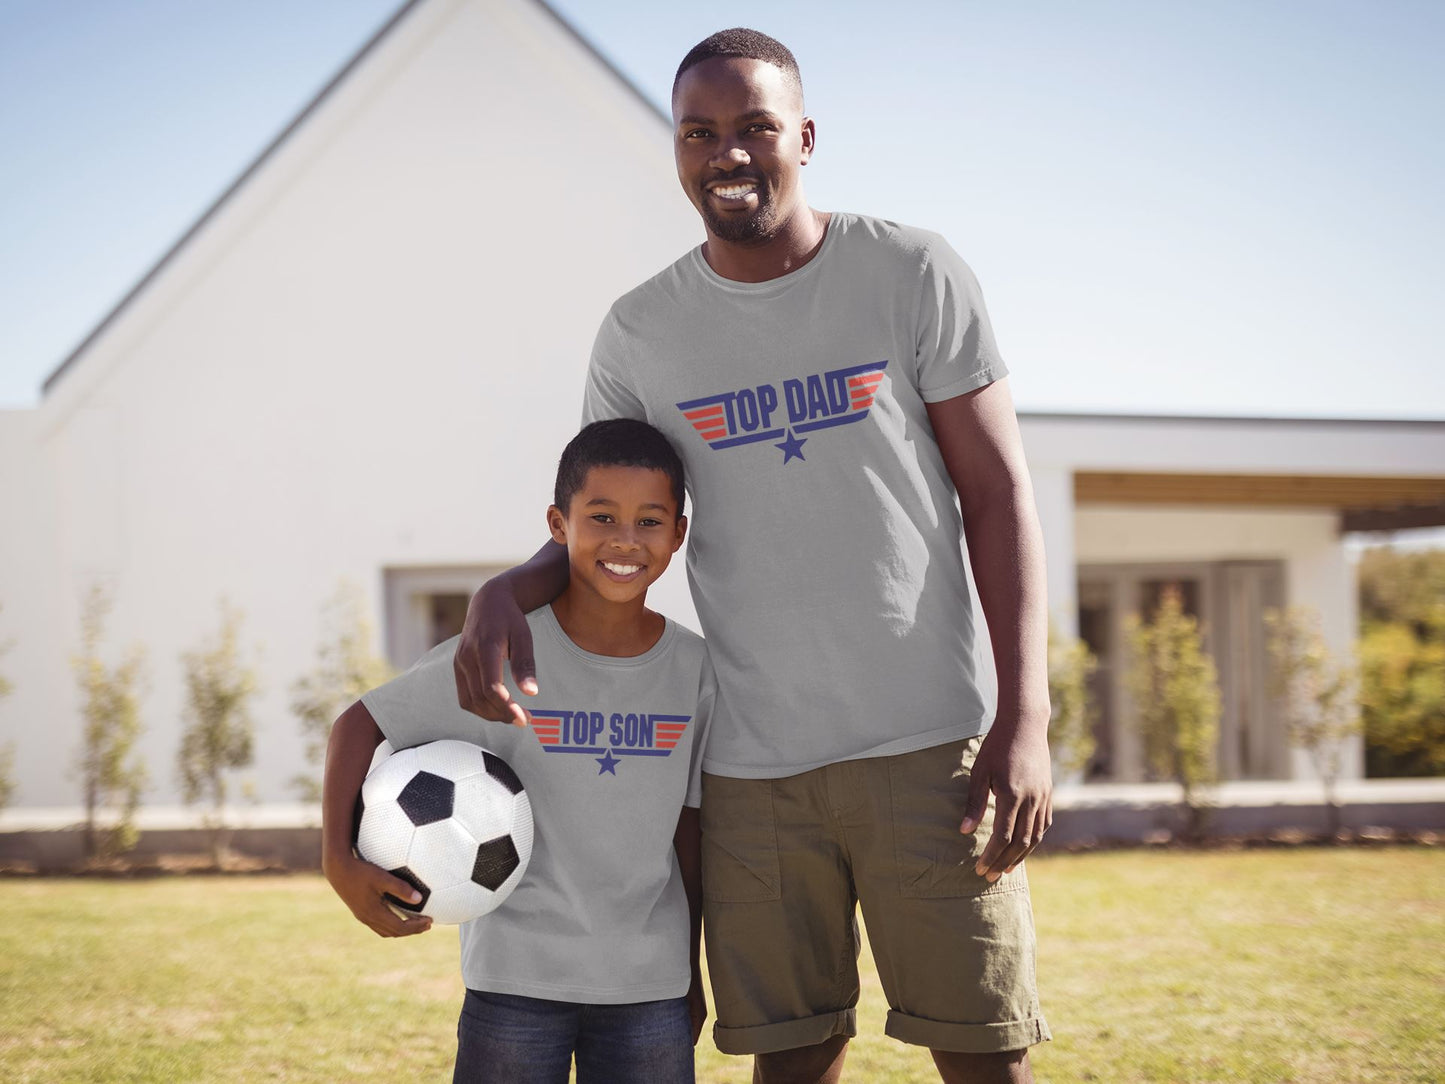 Top Dad Top Son Matching T-shirts